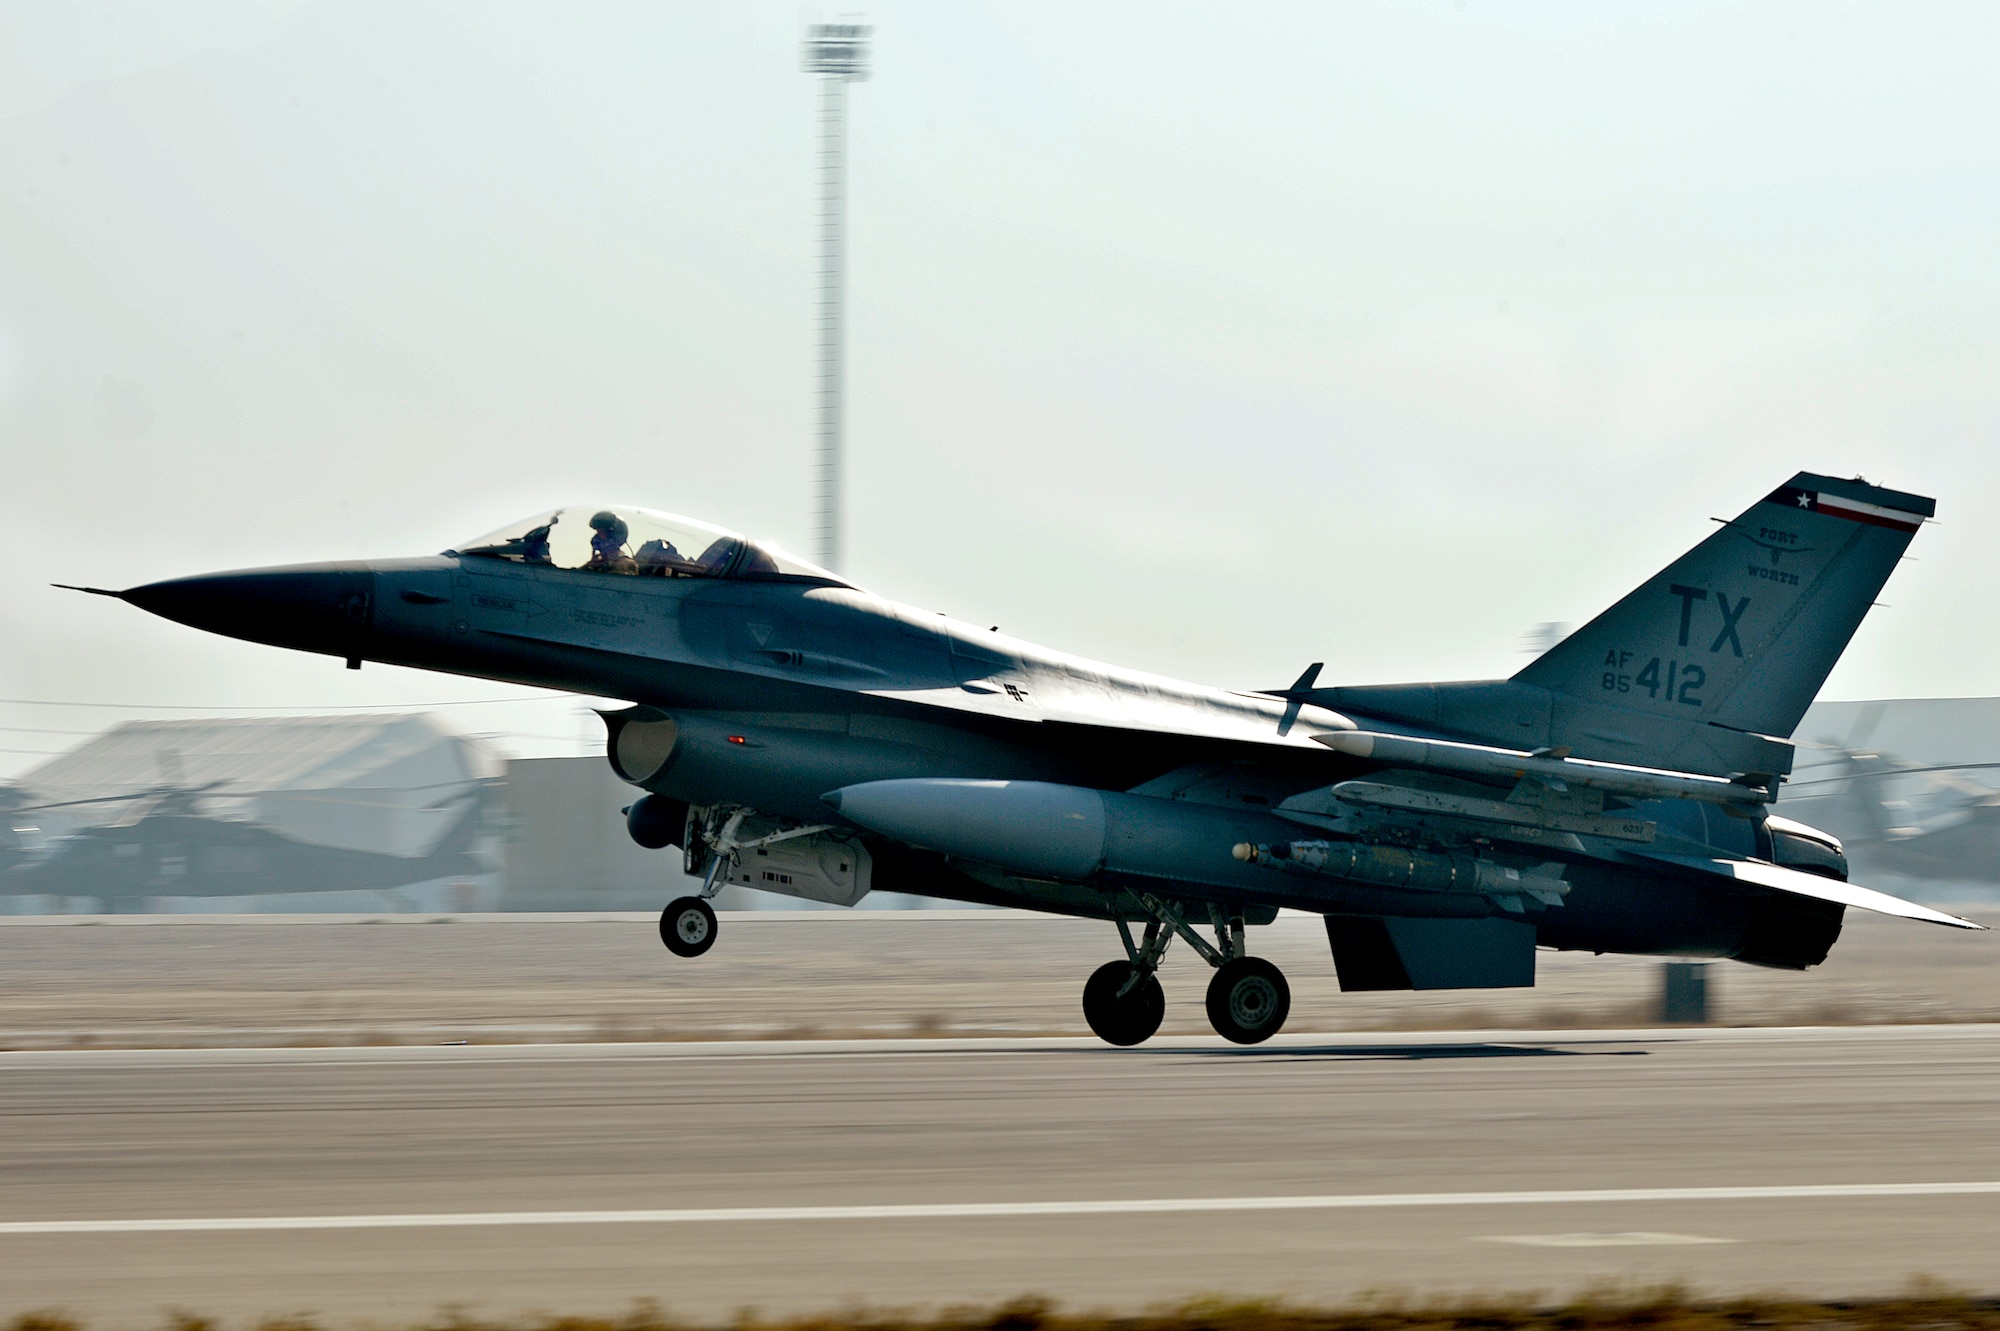 The first of the F-16 Fighting Falcons arrive at Bagram Airfield, Afghanistan, Dec. 15, 2013. The F-16s transitioned from Kandahar Airfield, Afghanistan, to Bagram once the main runway was renovated. (U.S. Air Force photo by Senior Airman Kayla Newman/Released)